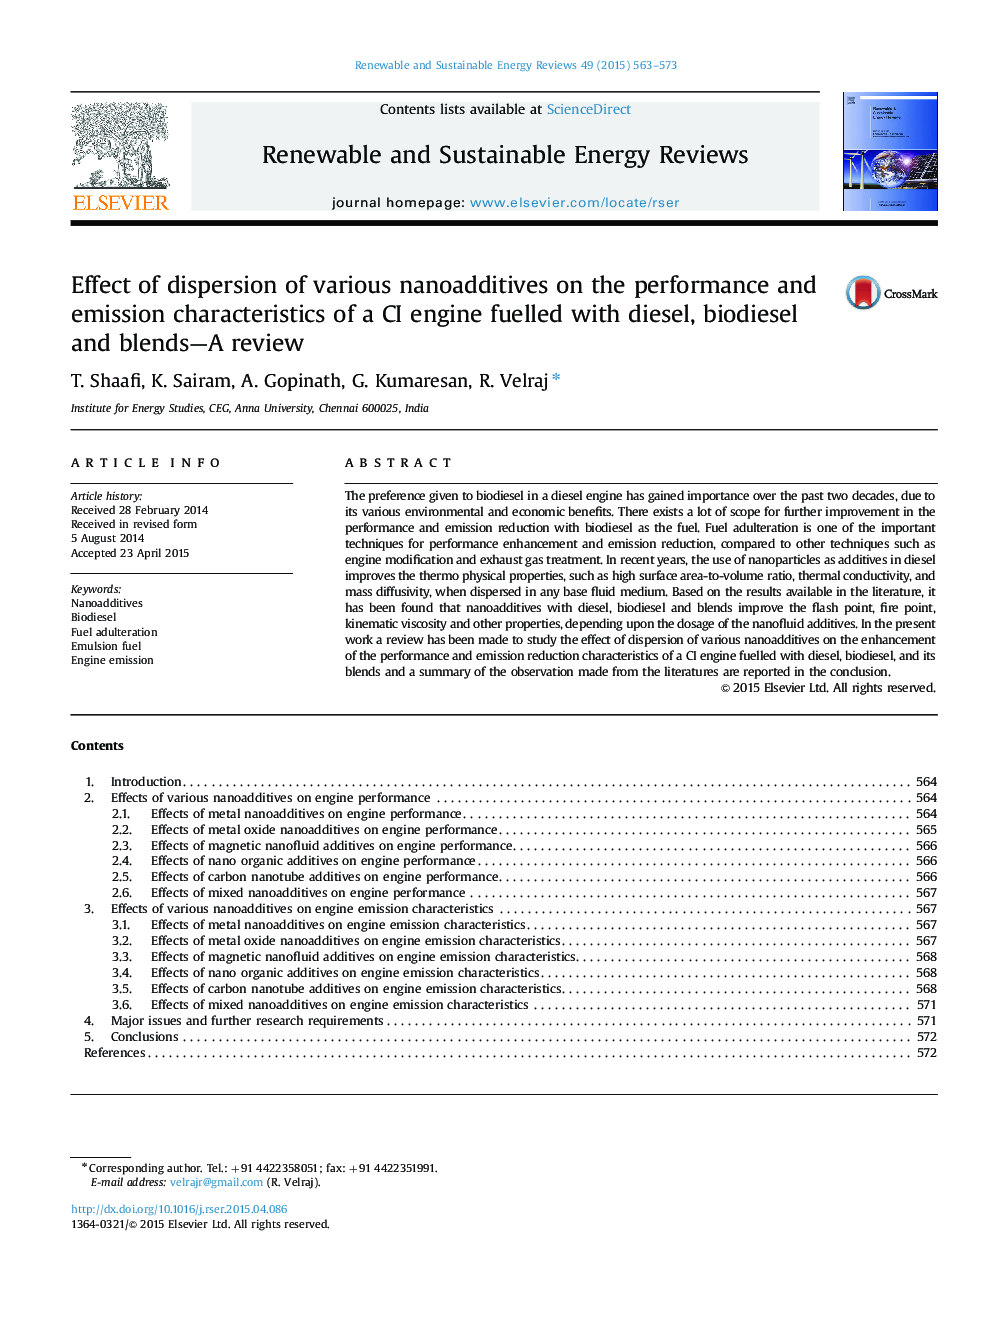 Effect of dispersion of various nanoadditives on the performance and emission characteristics of a CI engine fuelled with diesel, biodiesel and blends-A review